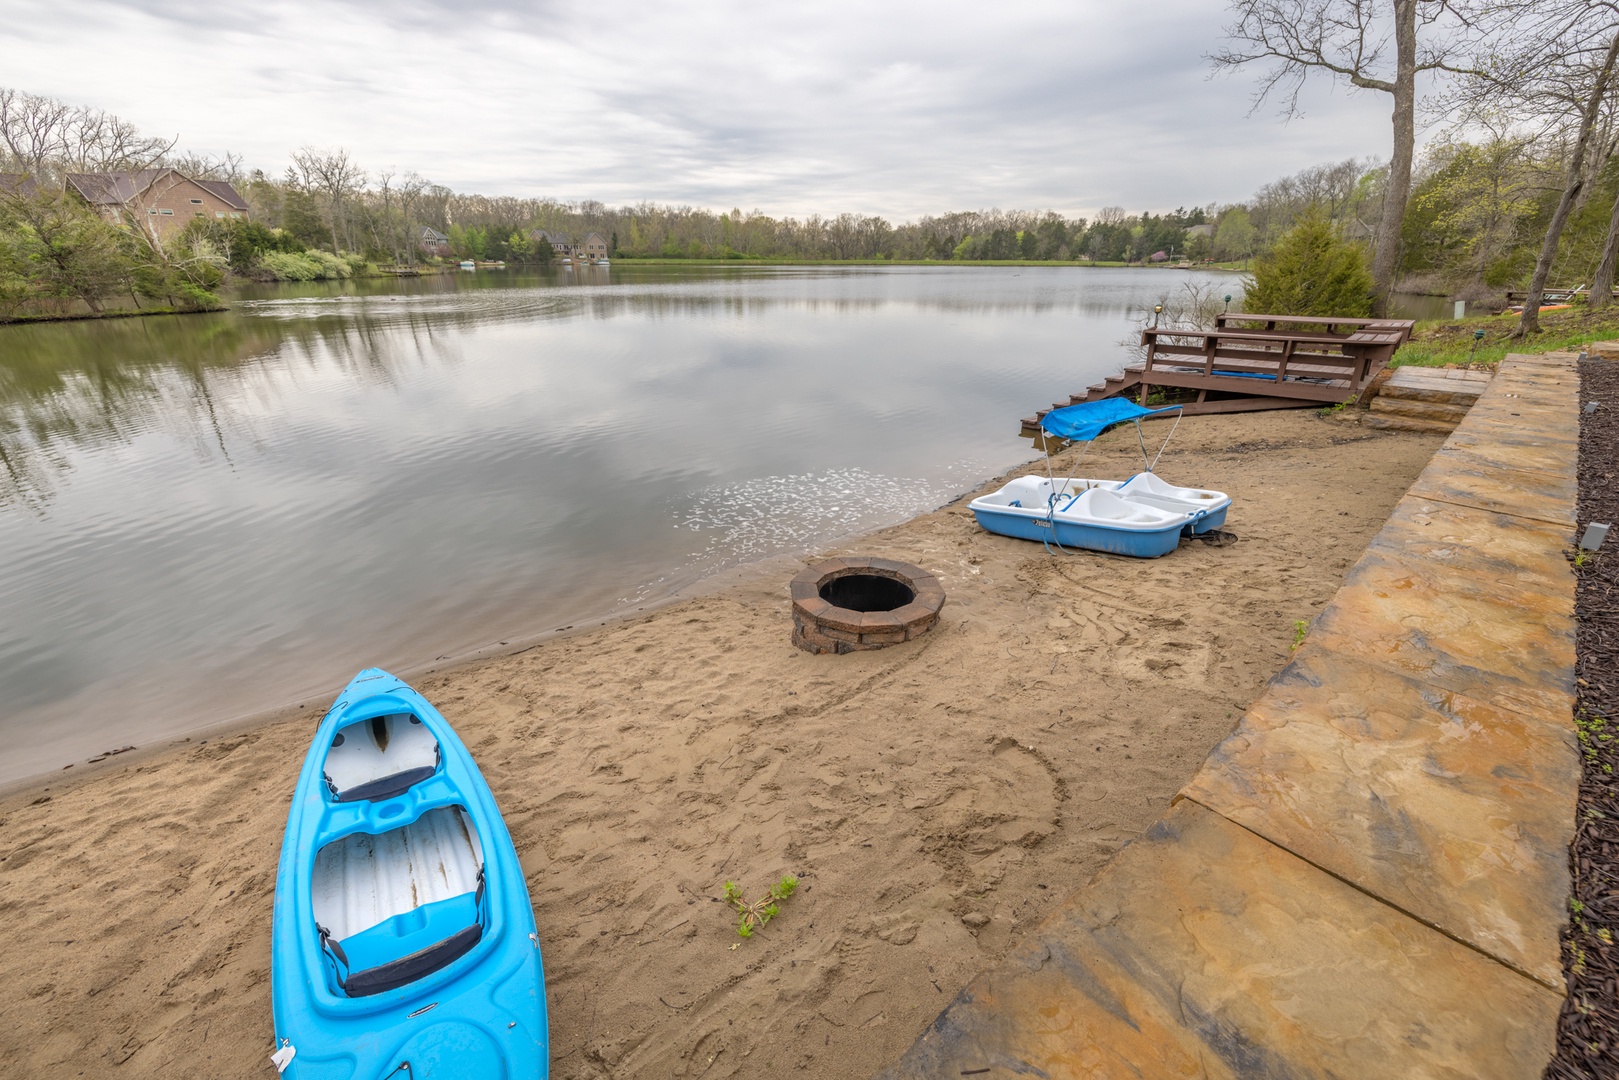 Live lake life to the fullest! Enjoy lounging on the private beach, roasting marshmallows lakeside, or exploring Lake Charrette on one of the many water toys